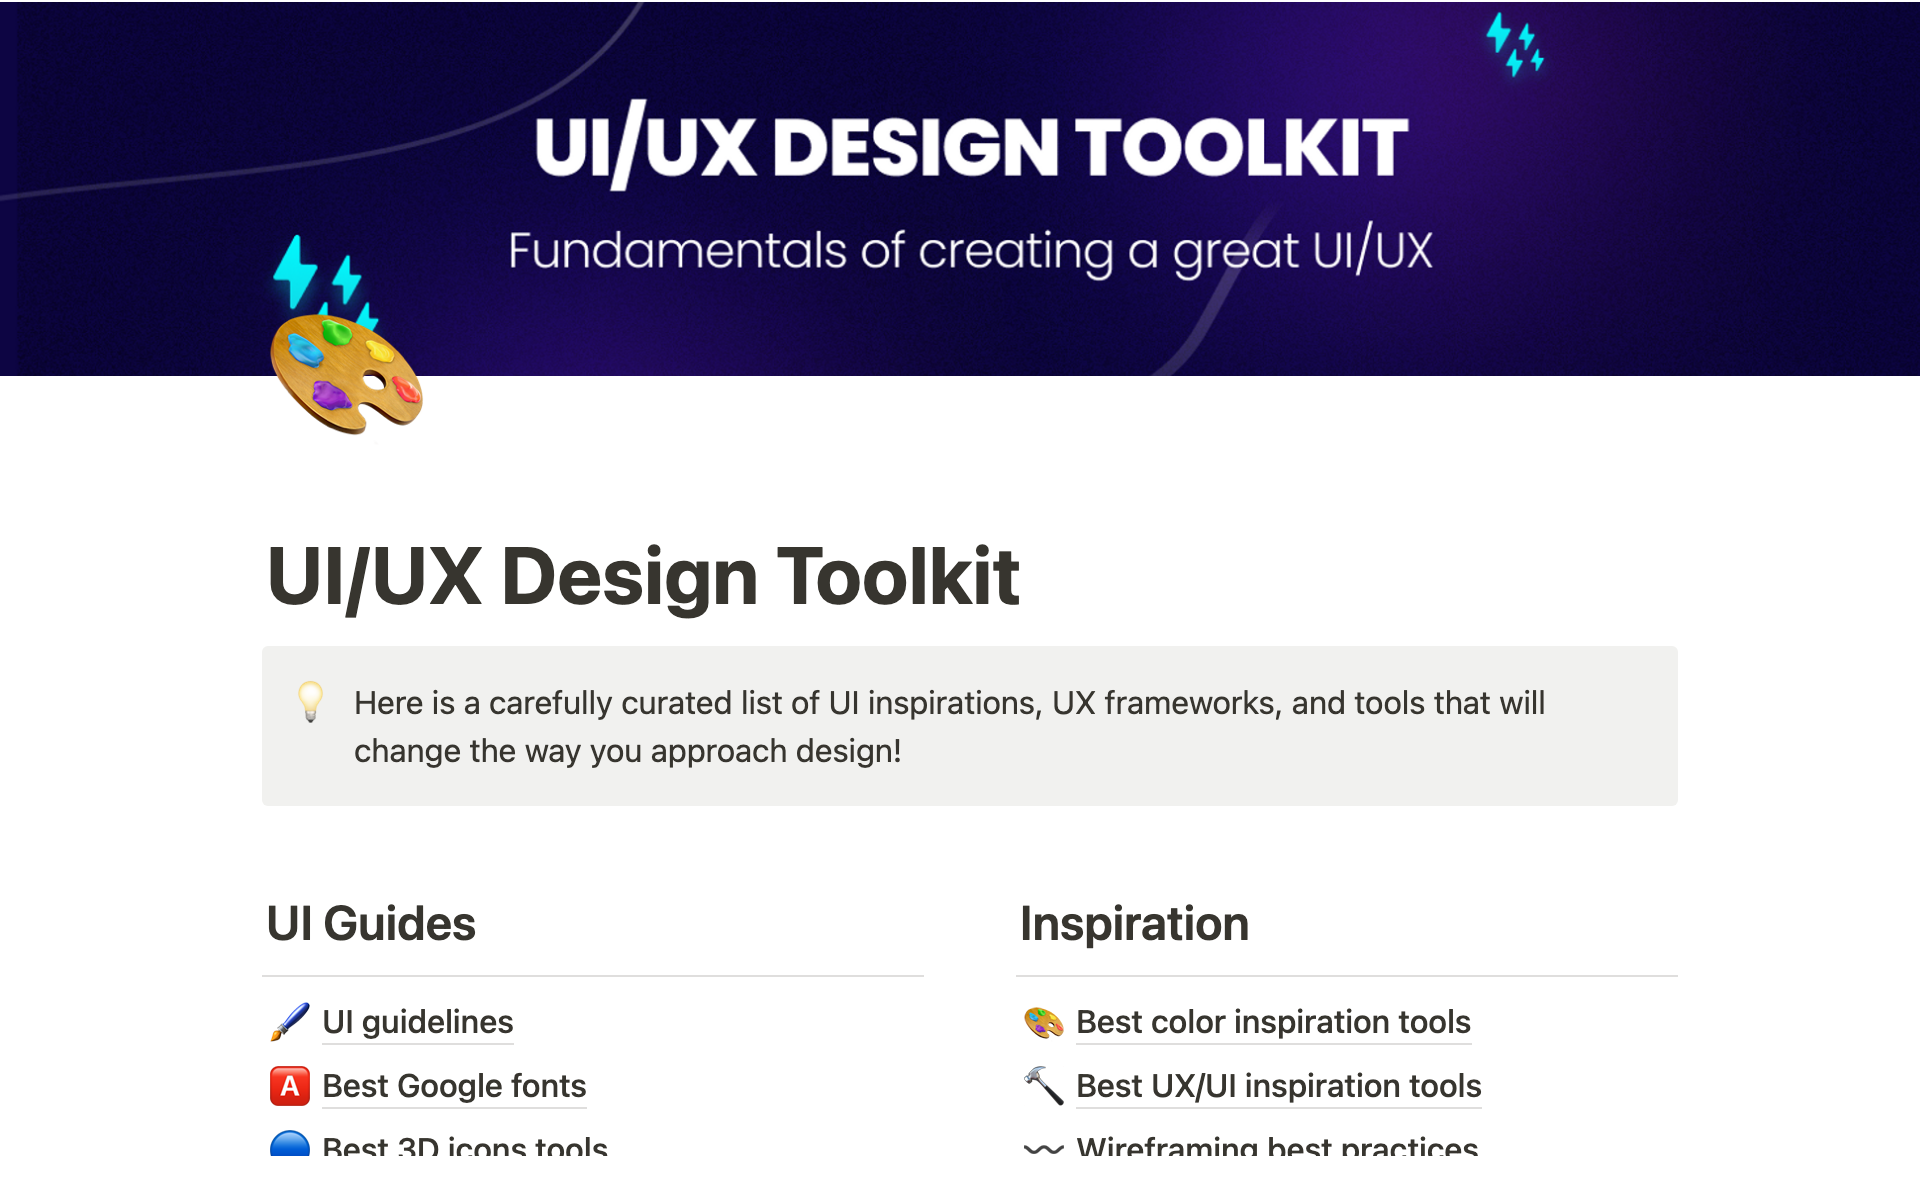 A curated list of game-changing tools, best practices, UX frameworks, and UI inspirations for UI/UX designers.